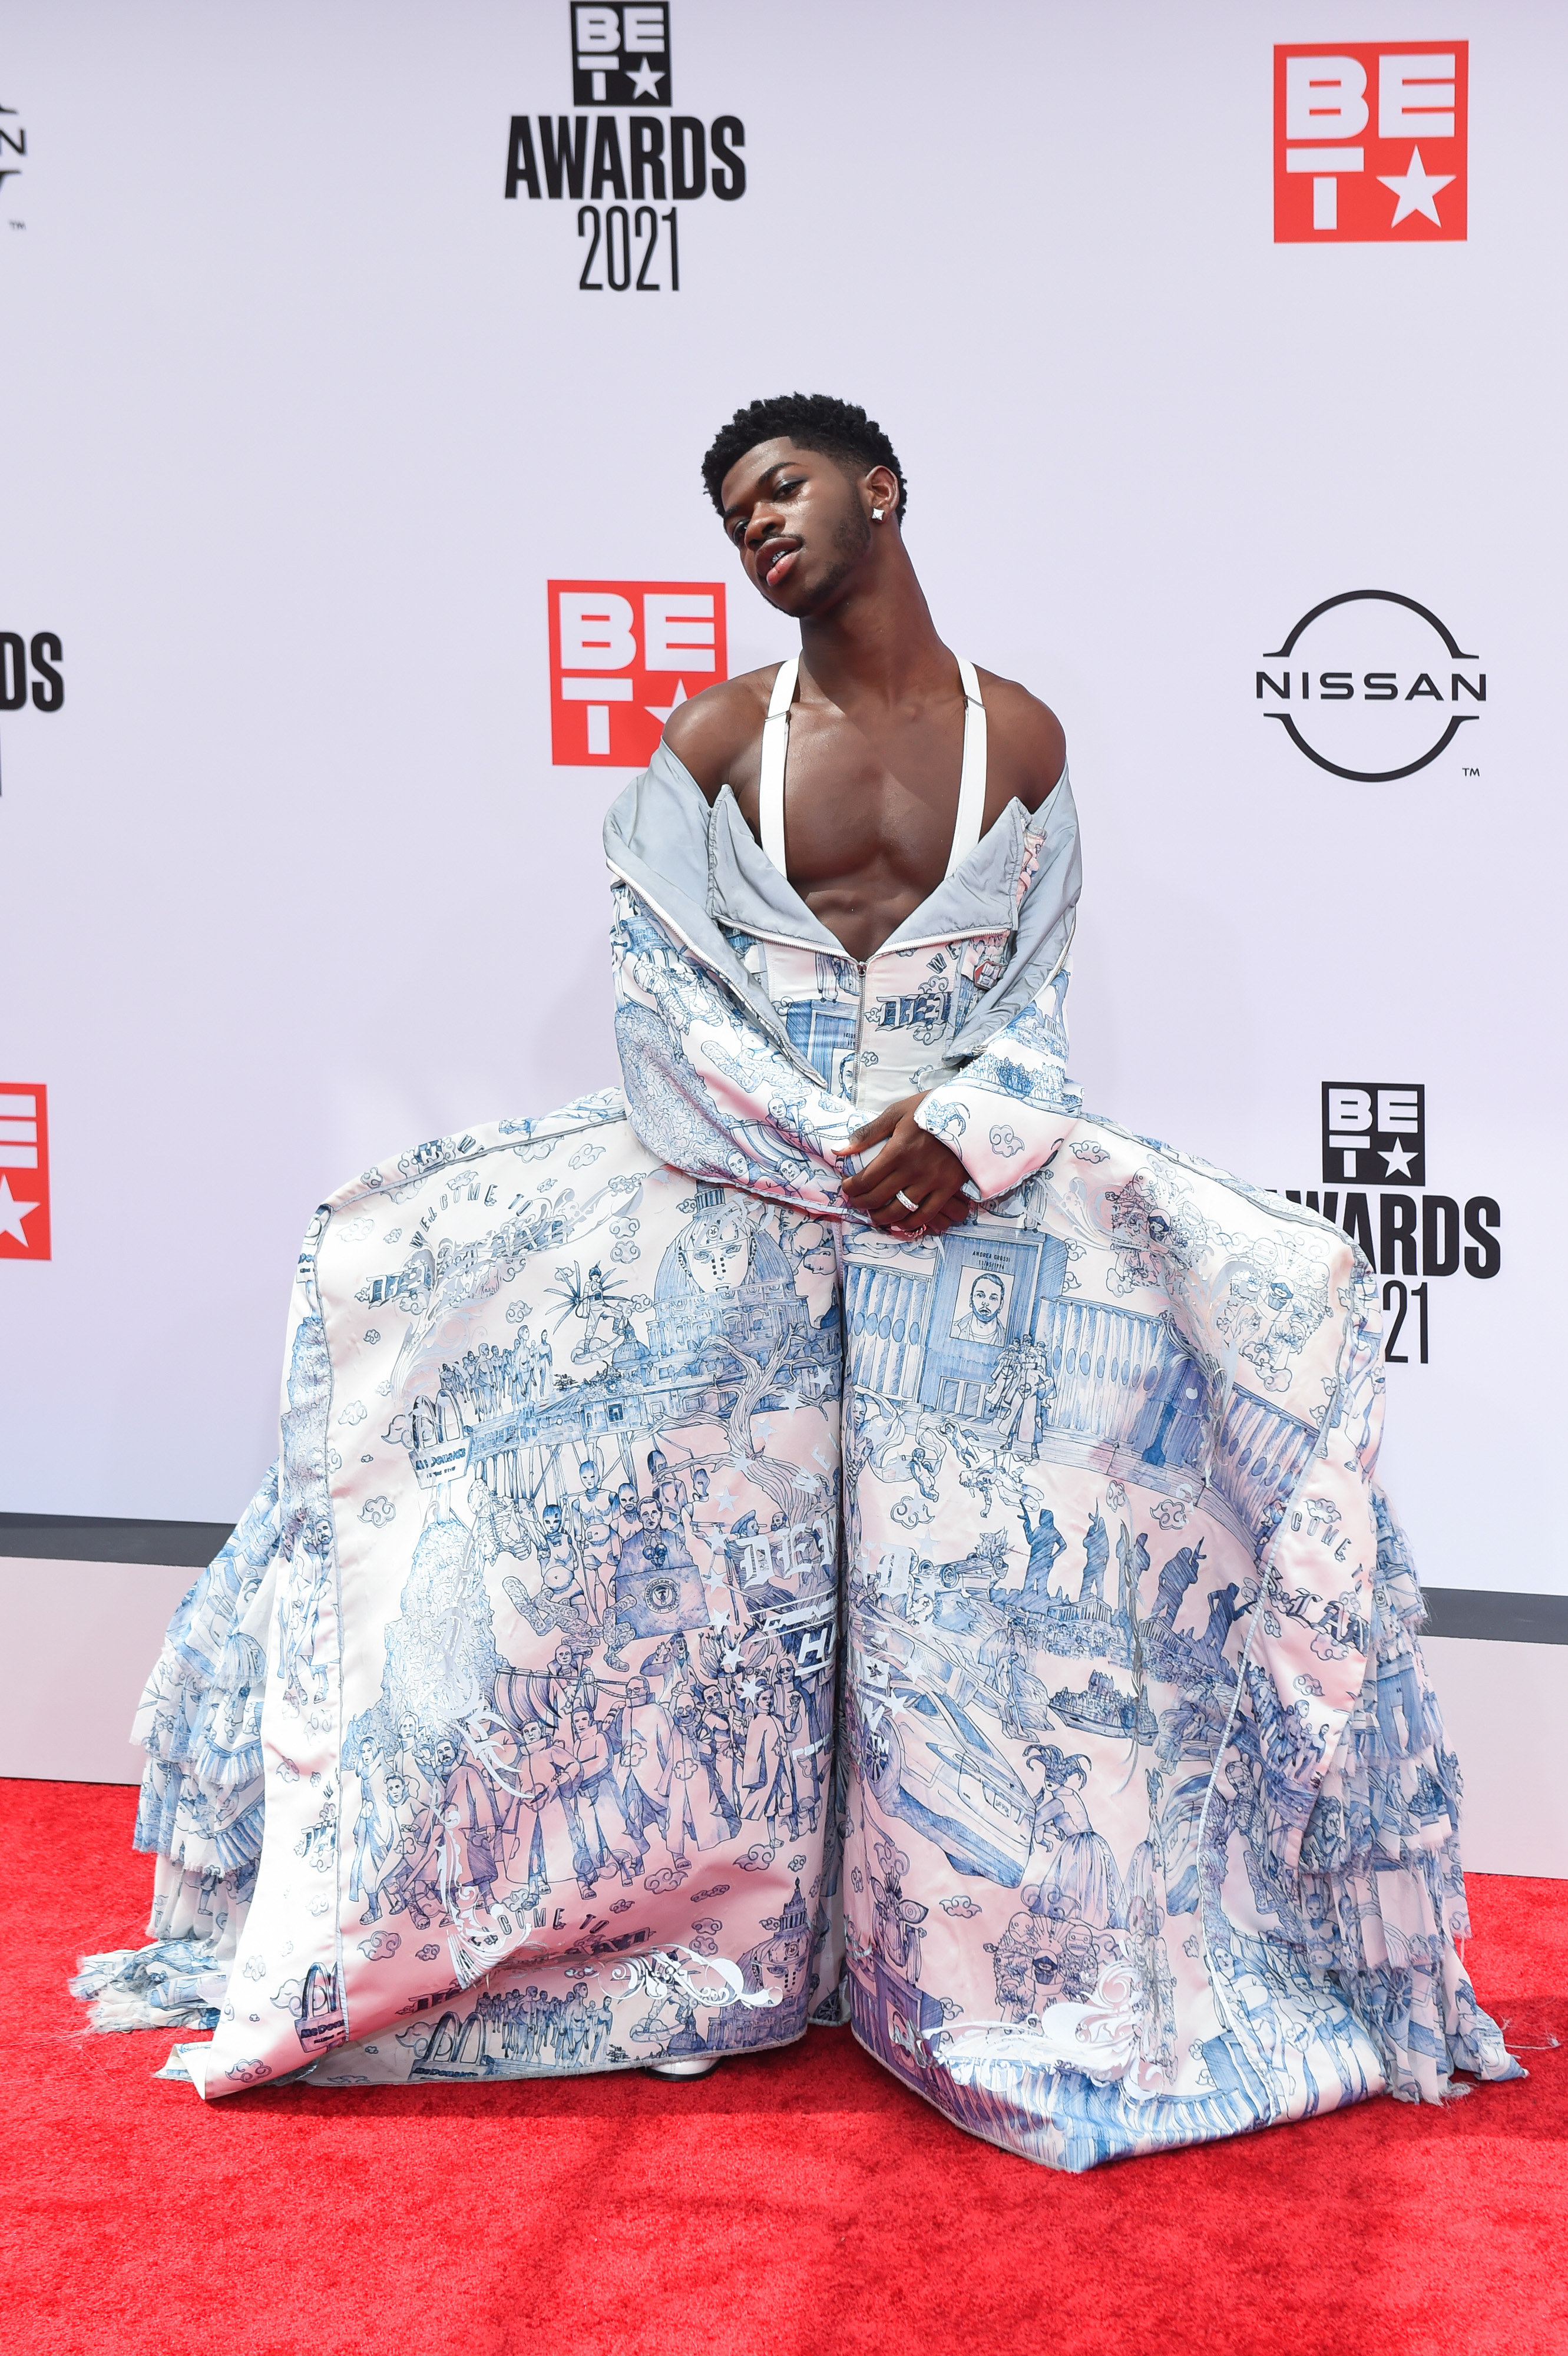 Recording Lil Nas X attends the 2021 BET Awards at the Microsoft Theater on June 27, 2021 in Los Angeles, California